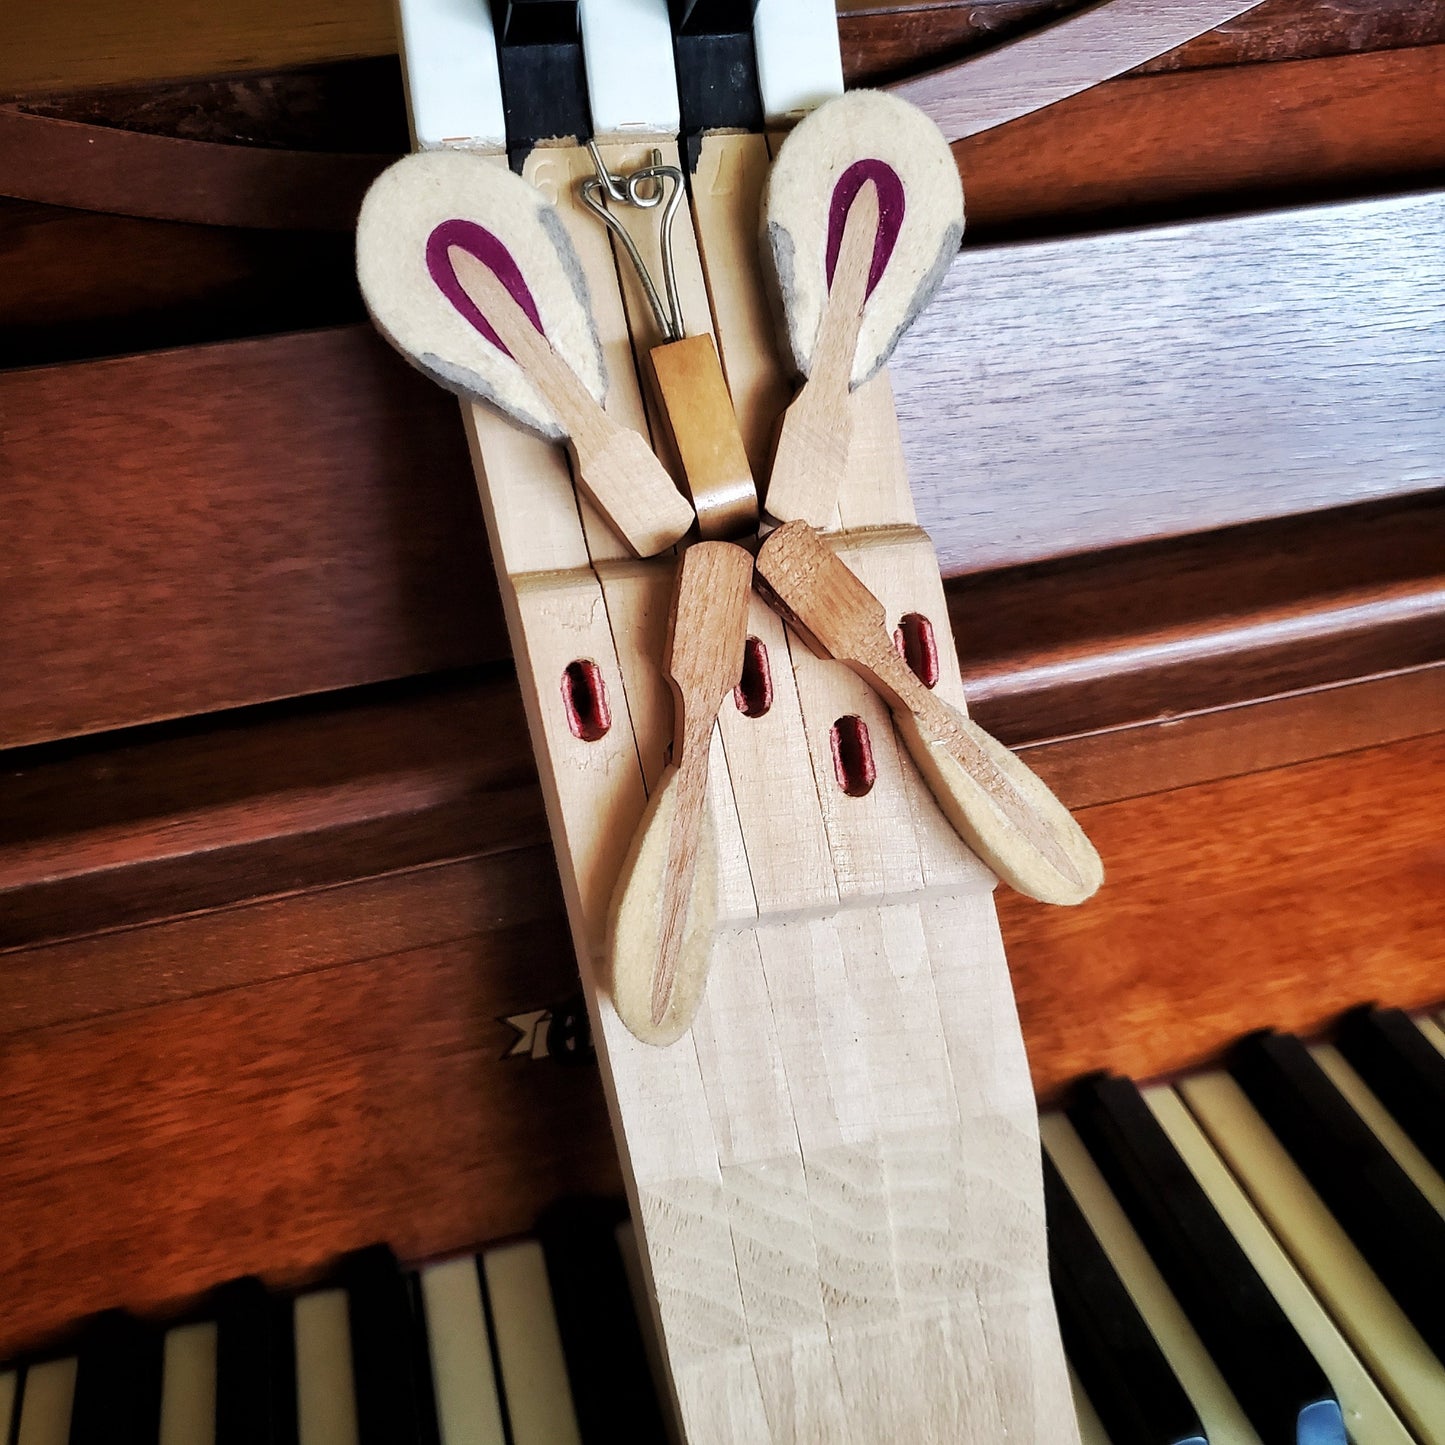 close-up of a key holder made from 5 upcycled piano keys on the keyholder is a butterfly design made from piano keys and other parts - the key holder is sitting on a piano keyboard